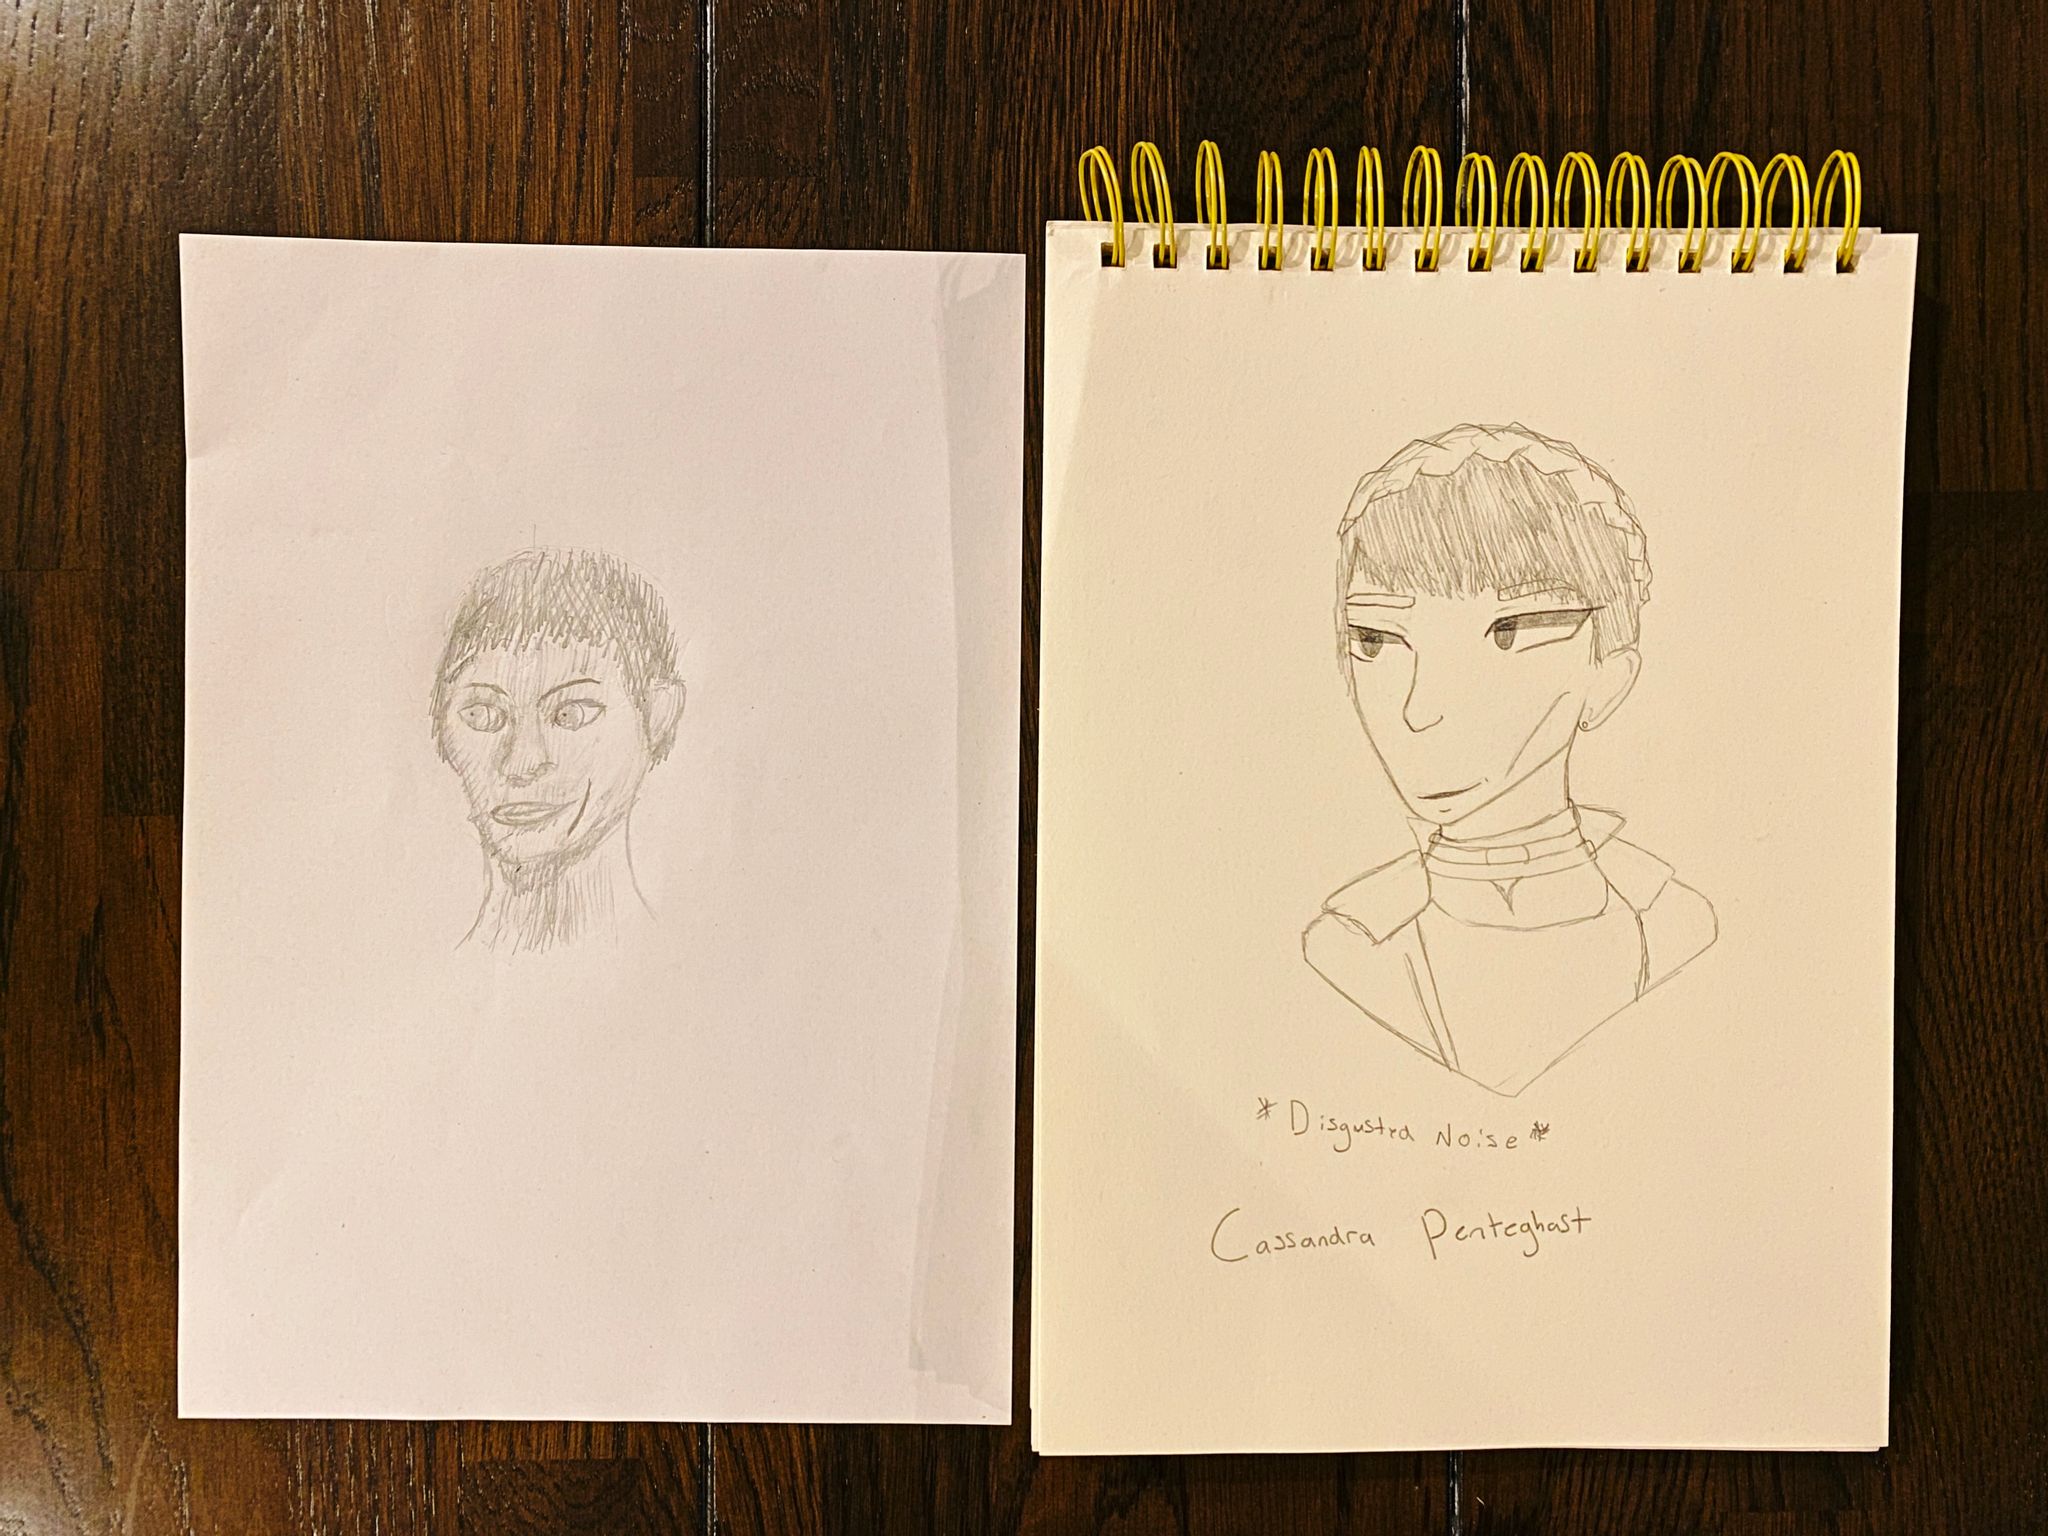 Another two pencil drawings, this time of Cassandra Pentegast, a woman with short hair and a scar down one side of her mouth, and both are in 3/4 profile. Mine is very rough and has what's meant to be kind of cross-hatch-style shading but it's ended up looking more like she has a wispy beard. Lily's is in the same stylised clean and tidy style as the first picture.